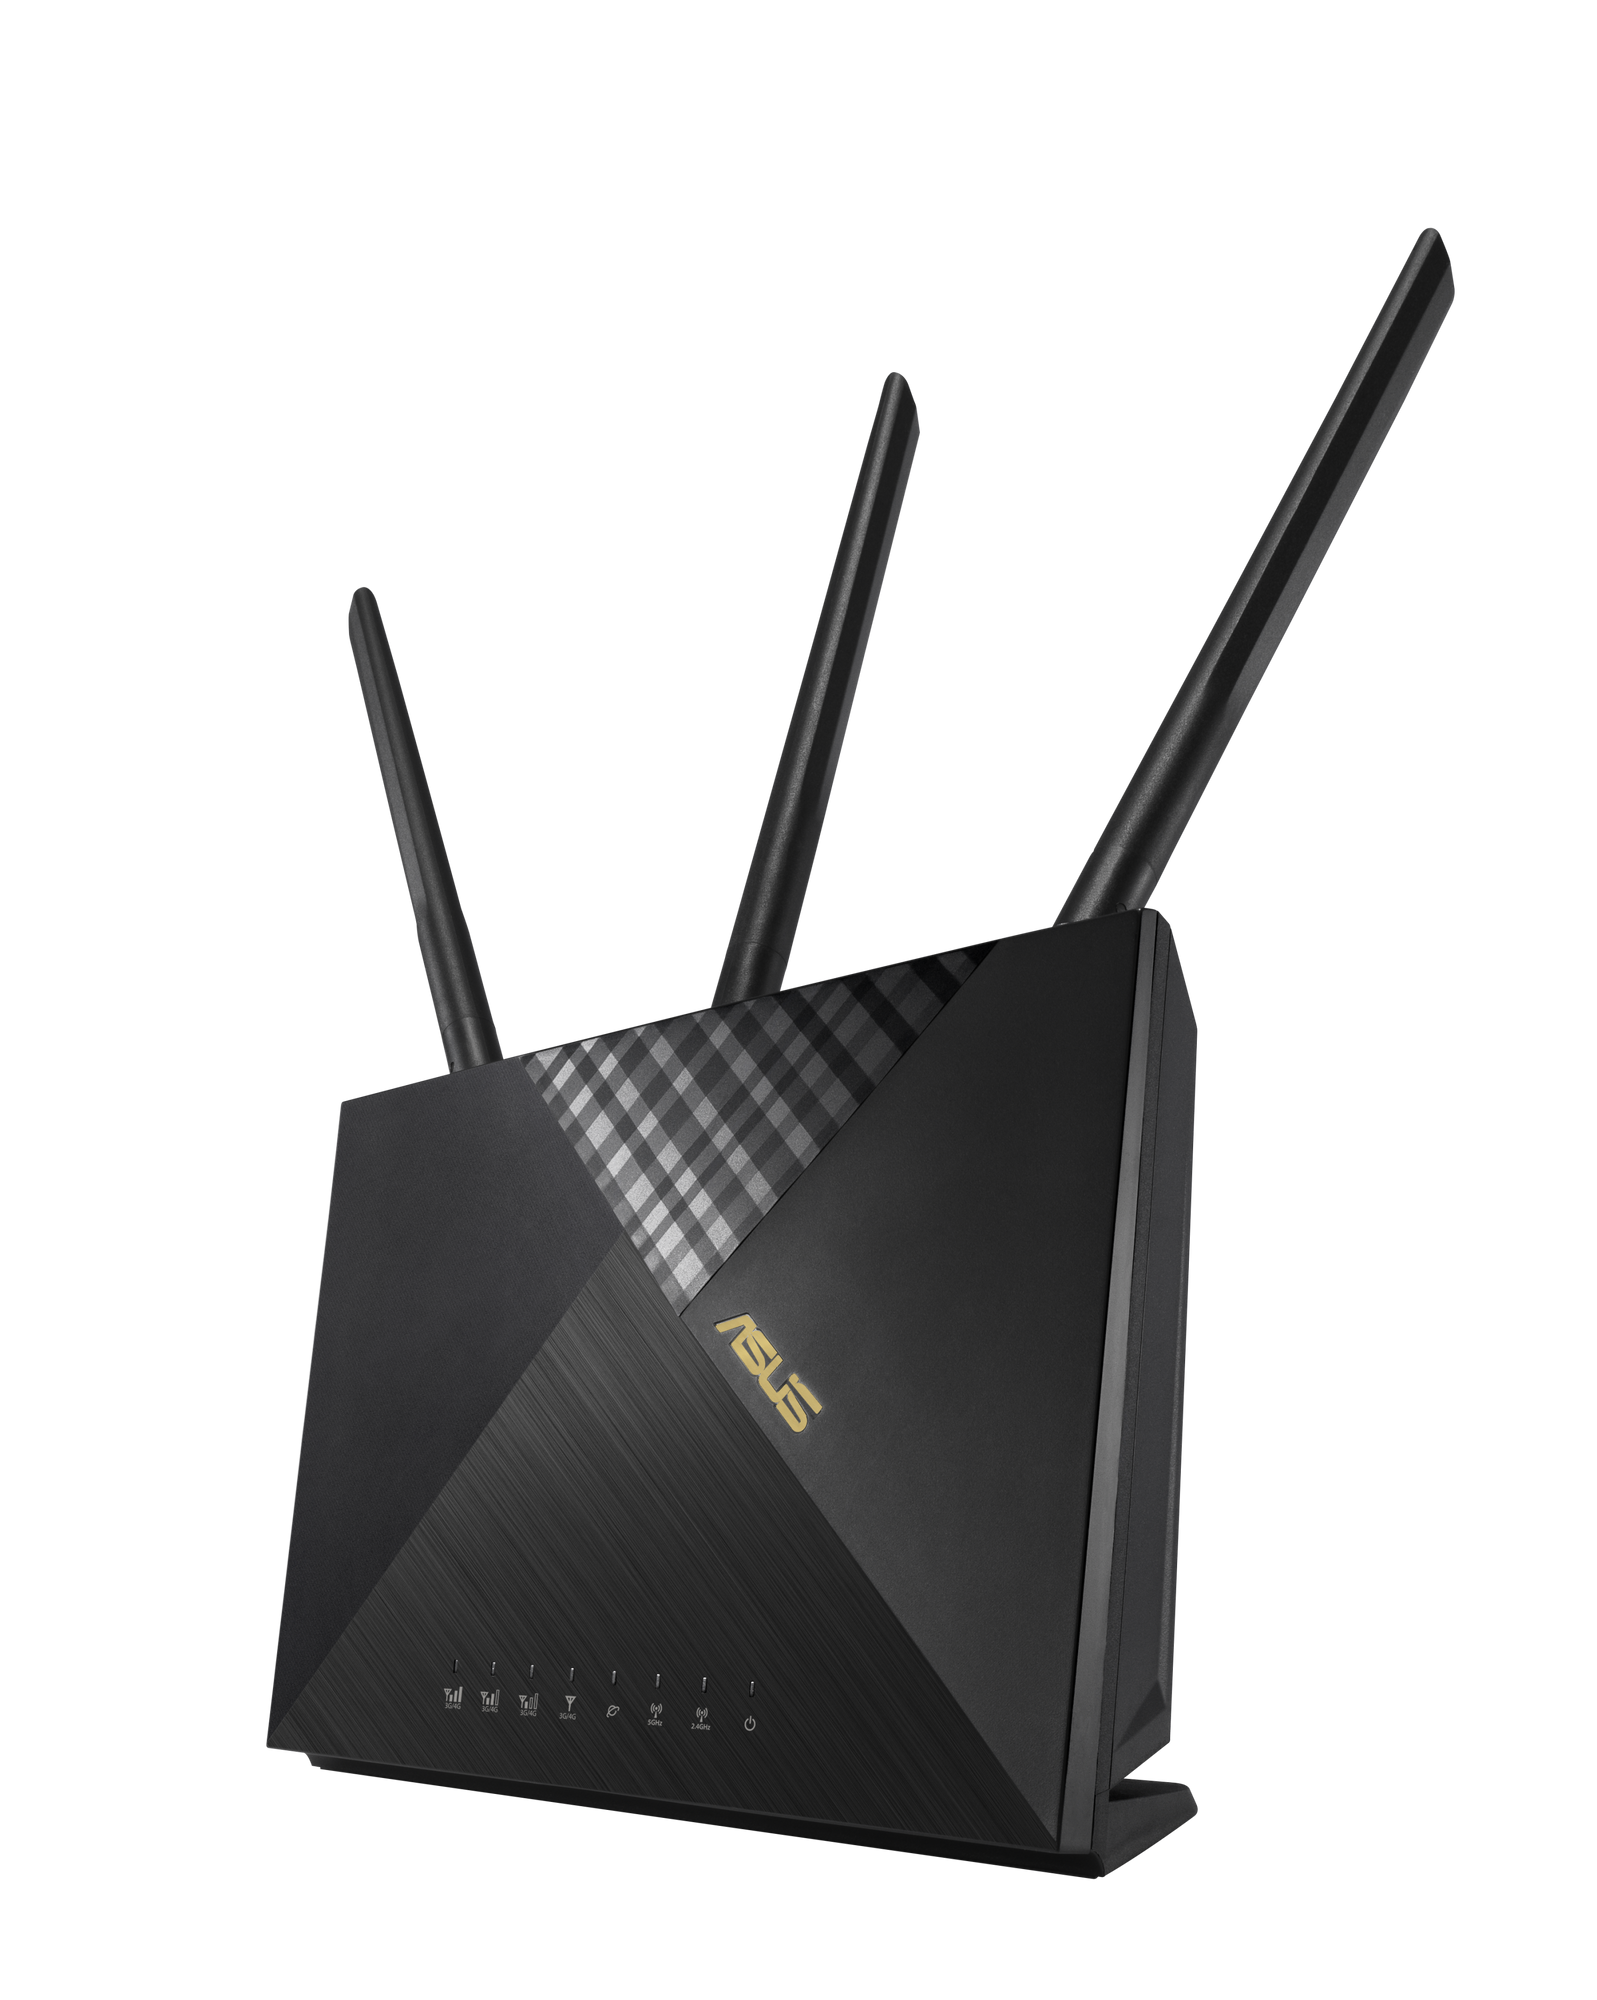 ASUS 4G-AX56 AX1800 LTE Router 1